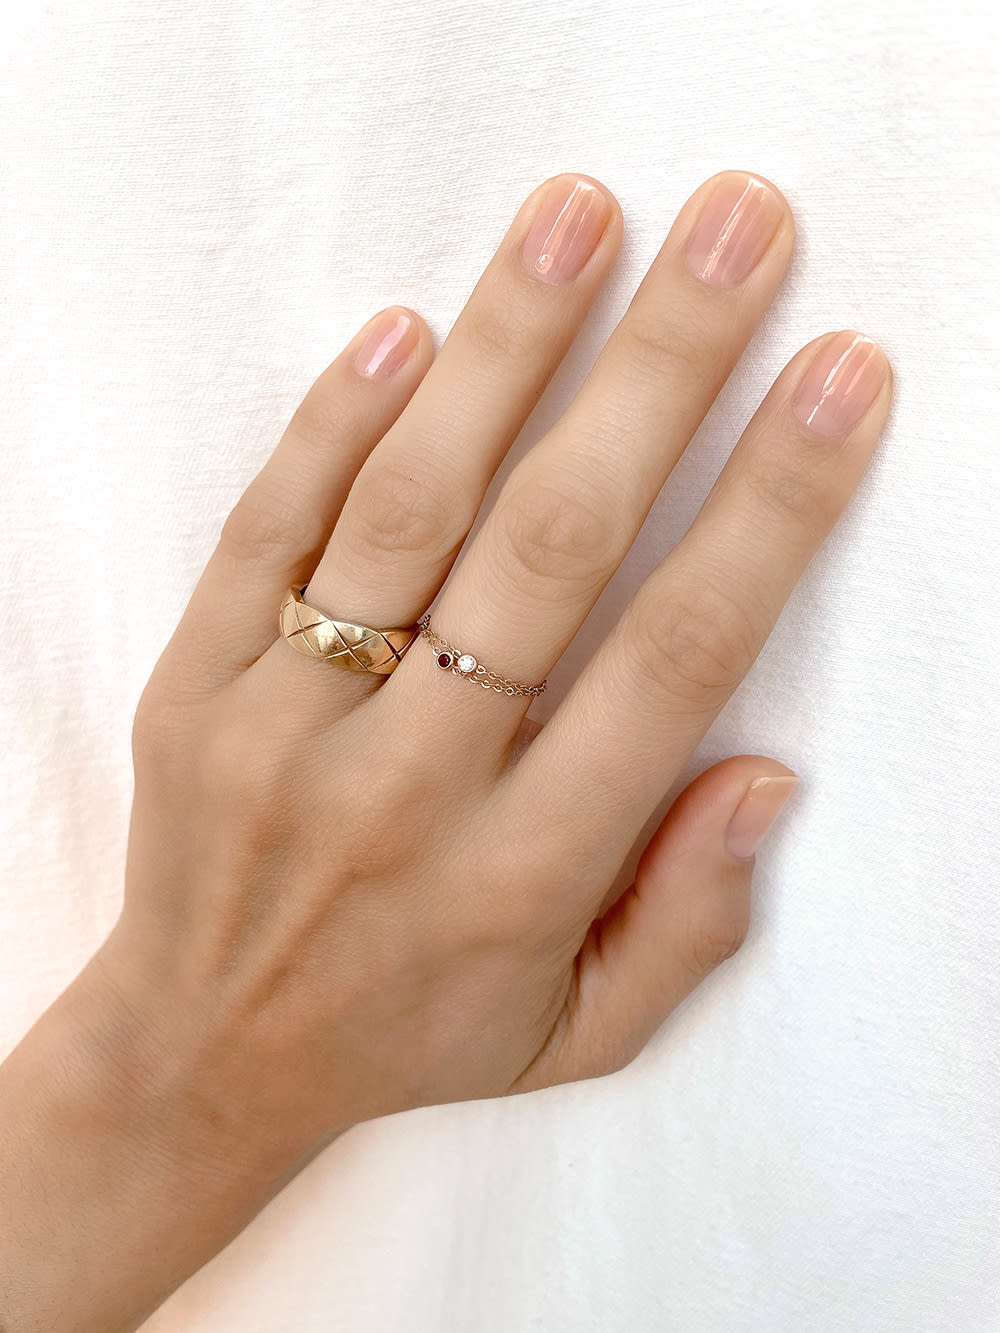 clean nails with sheer nude polish